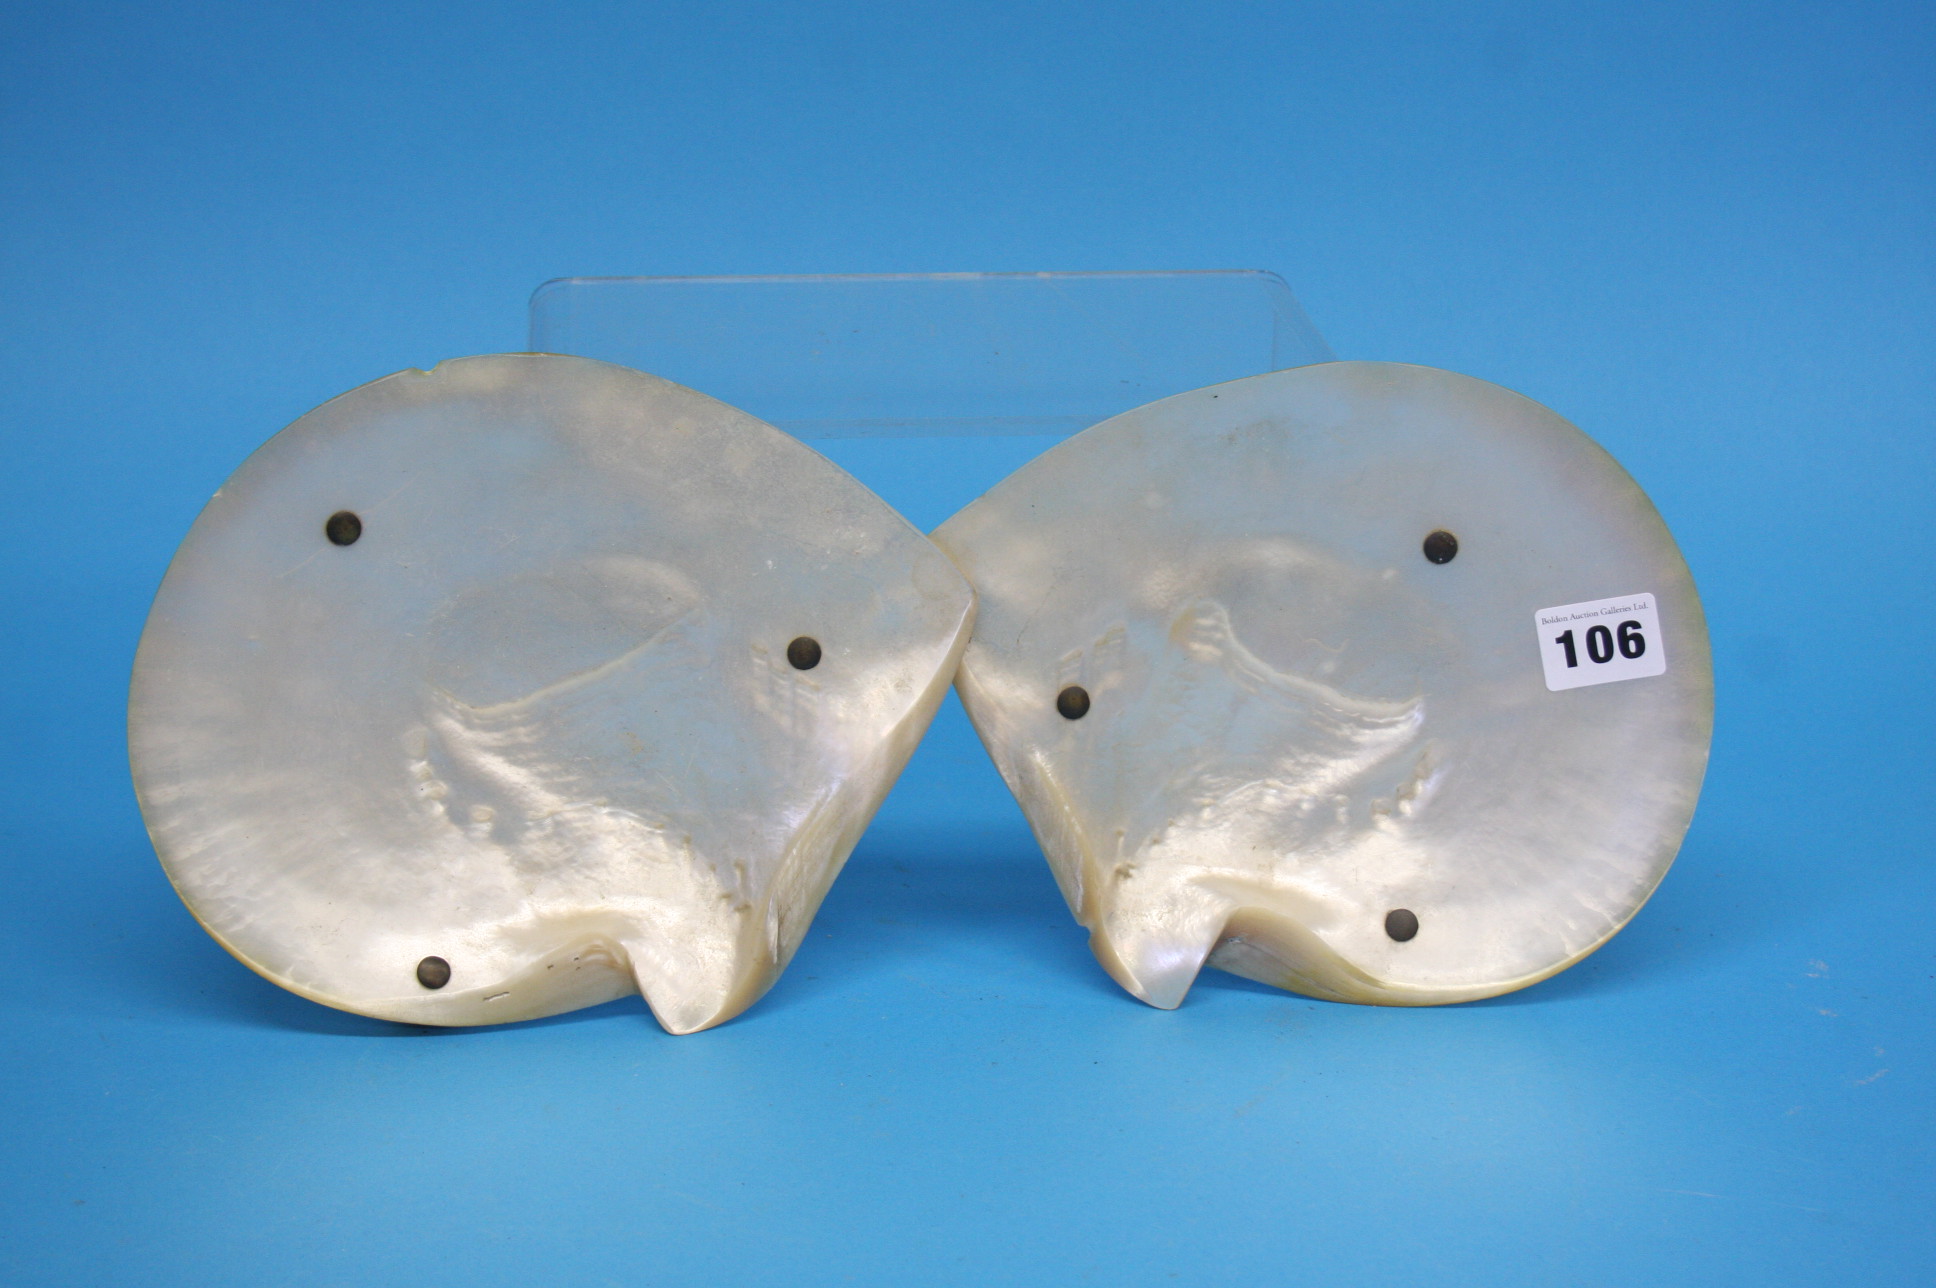 Pair of shell caviar dishes - Image 2 of 2